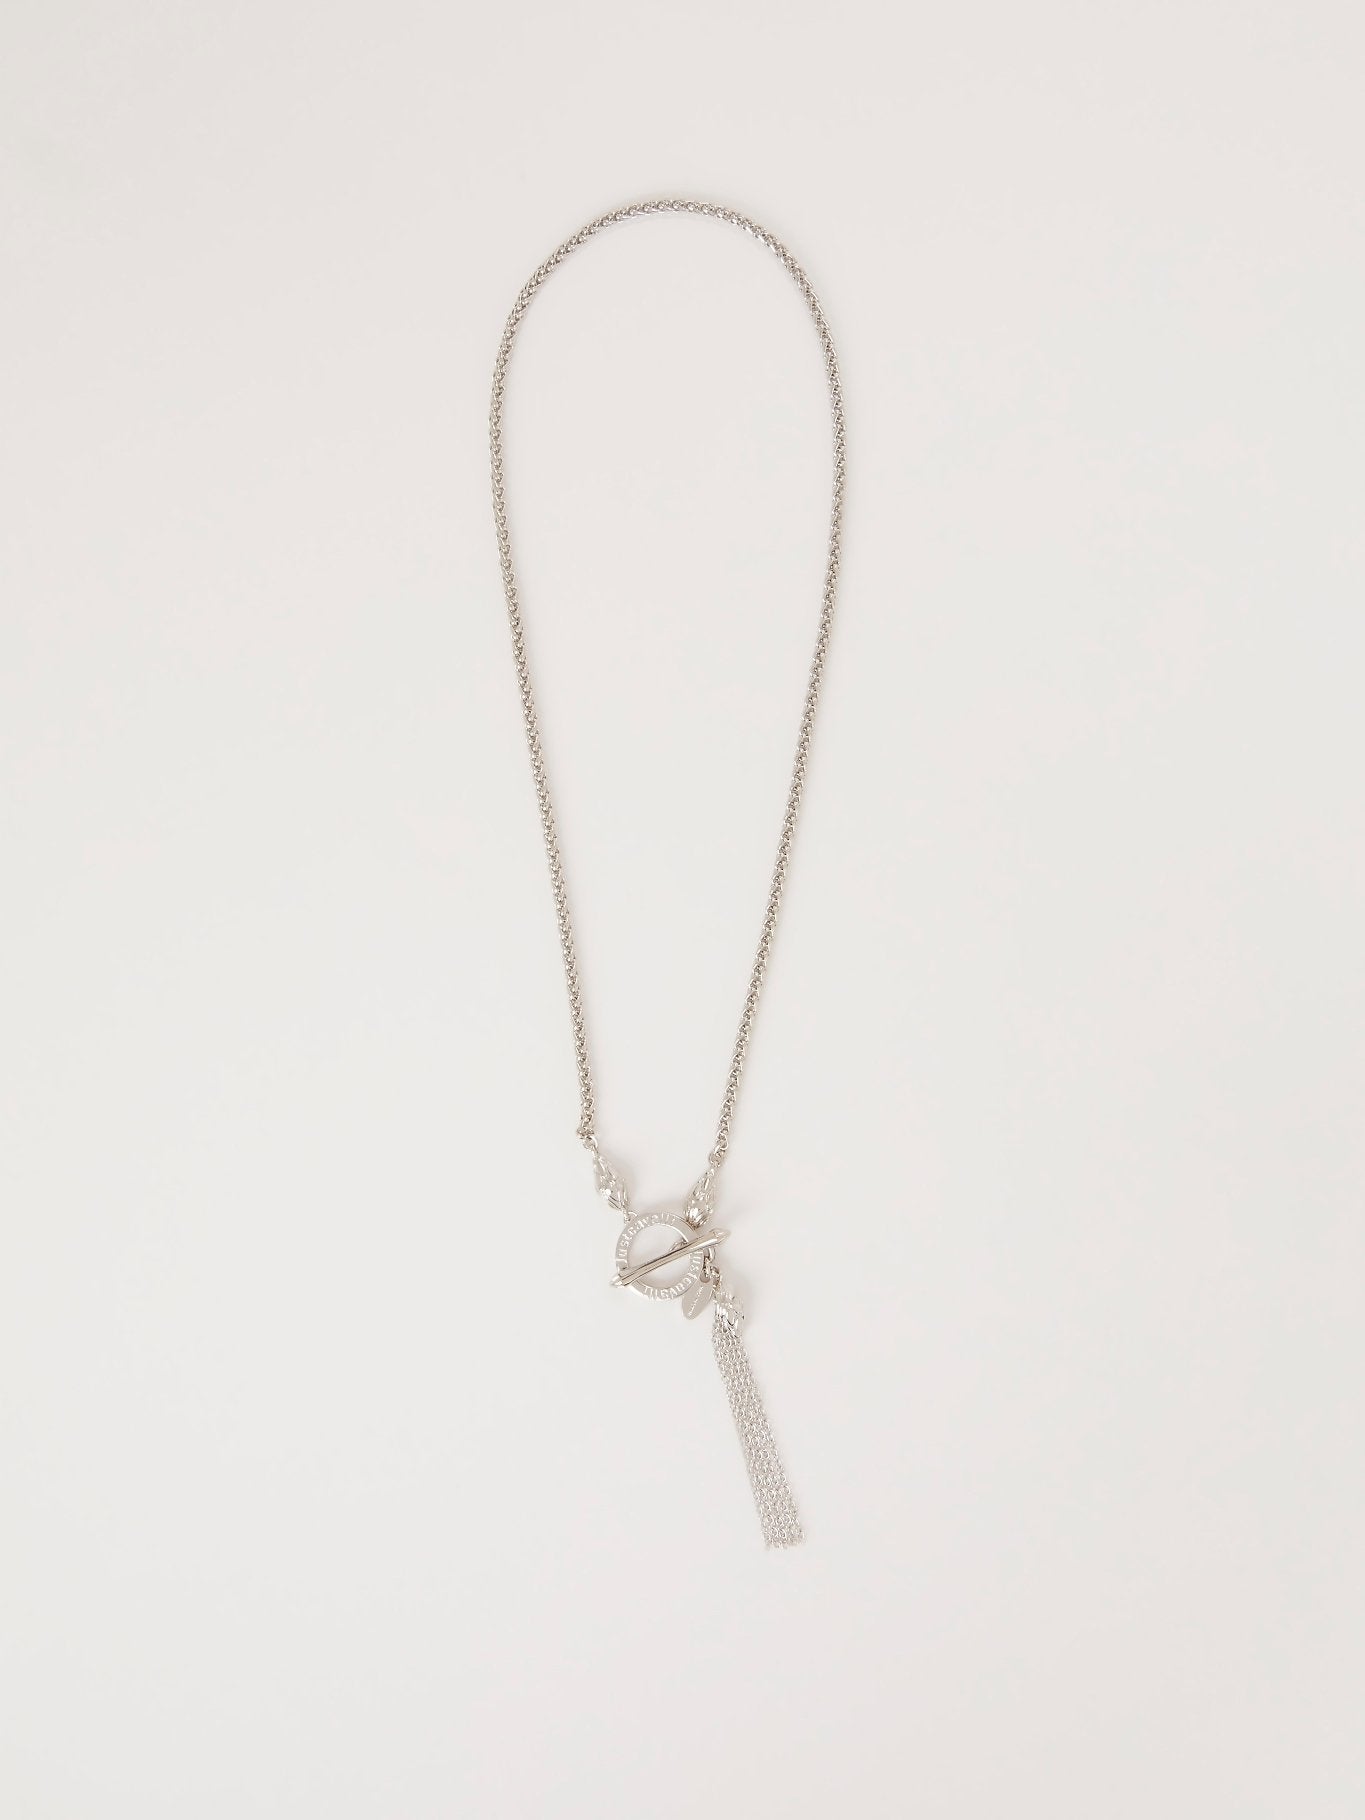 Silver Chain Tassle Toggle Clasp Necklace